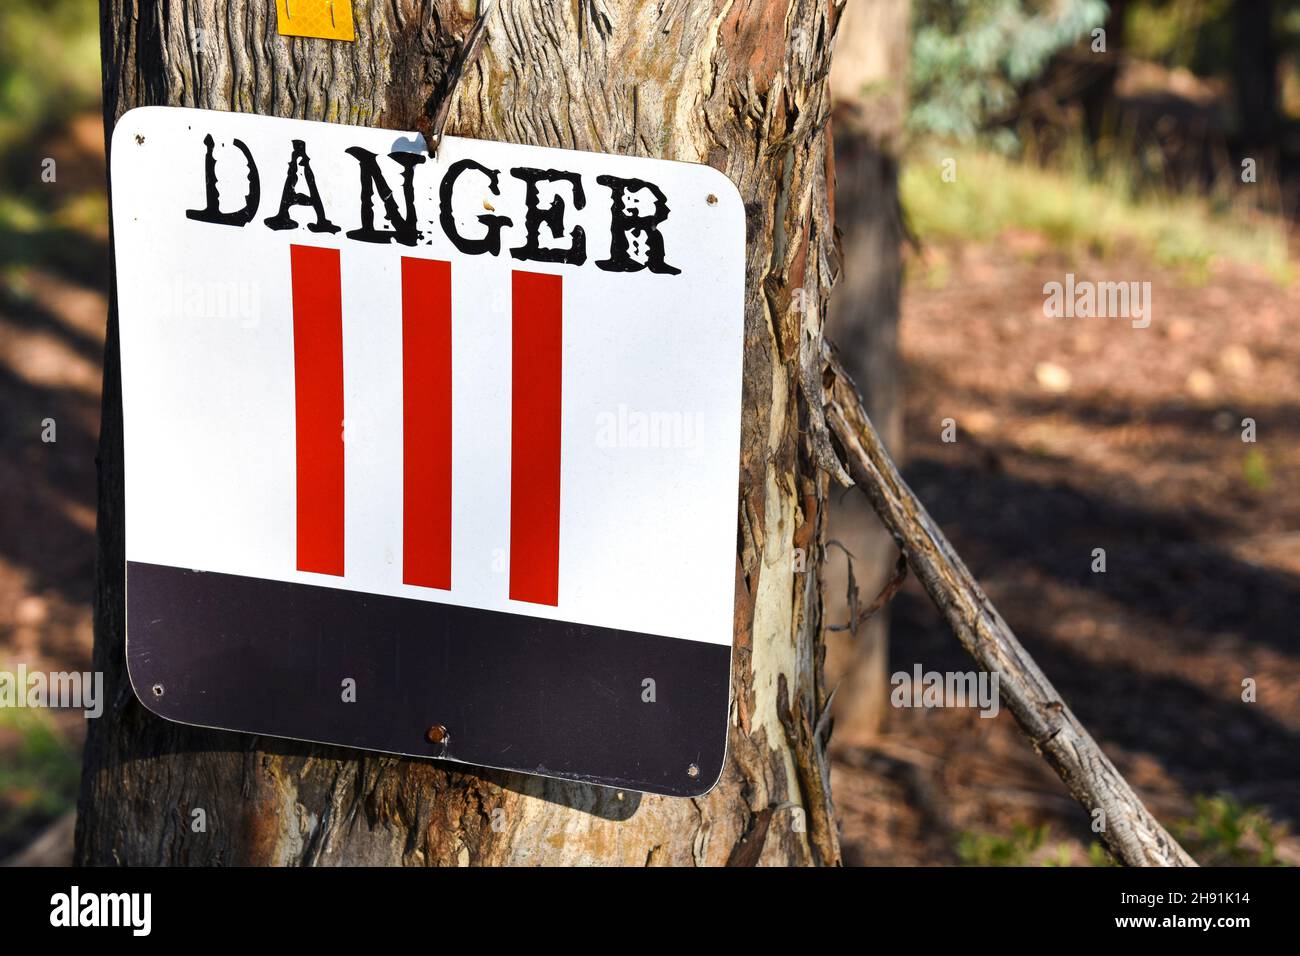 A danger sign with a unique design with black and red bright colors on a tree alerting mountain bikers and hikers of obstacles on the trail that may b Stock Photo